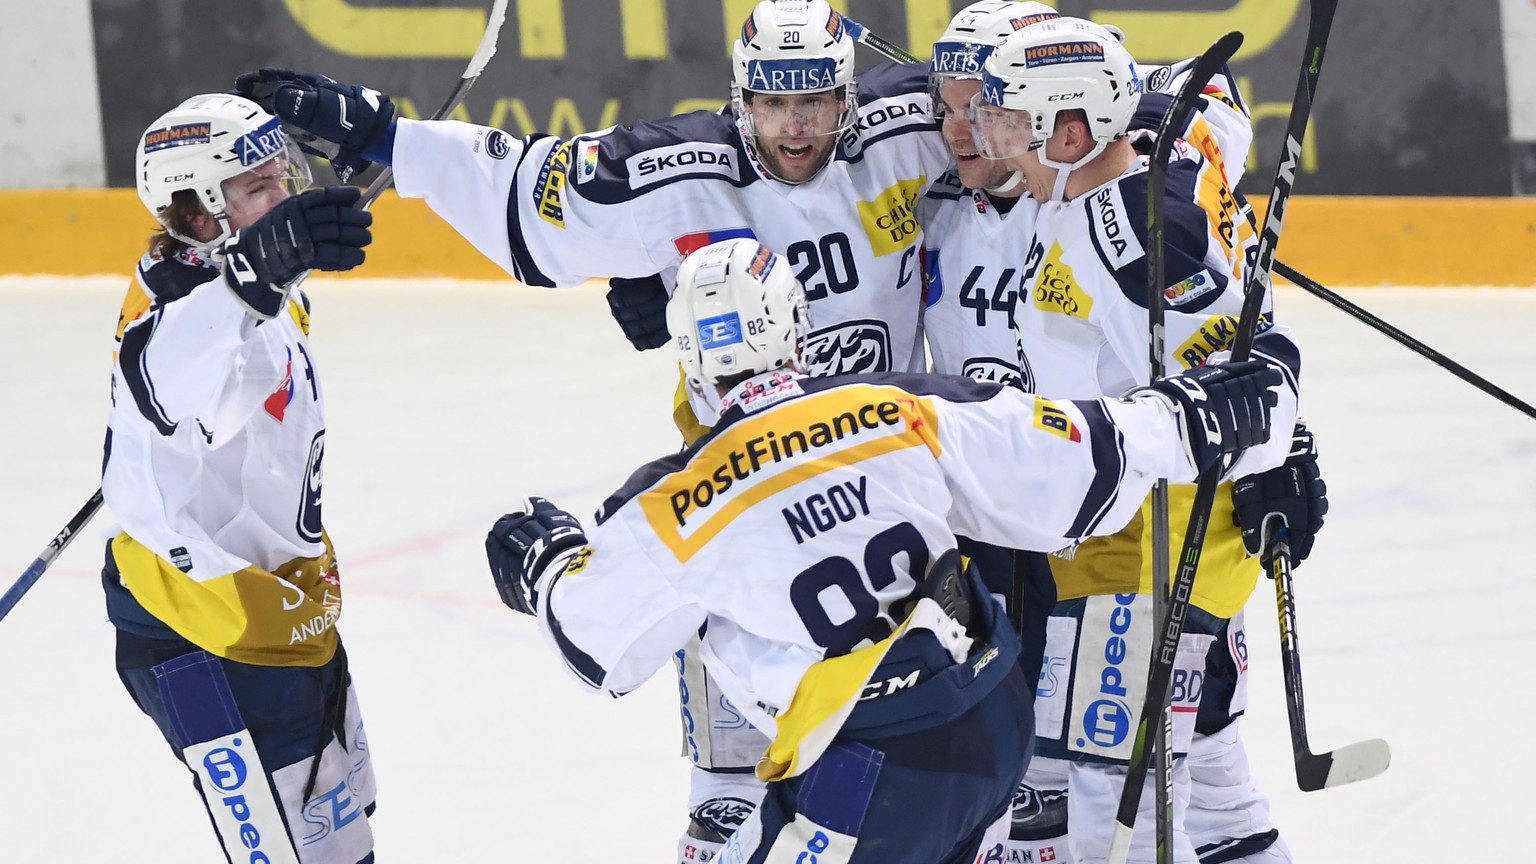 Ambri&#039;s player Elias Bianchi, center, celebrates the 0 - 3 goal, during the preliminary round game of National League Swiss Championship 2018/19 between HC Lugano and HC Ambri Piotta, at the Corn ...